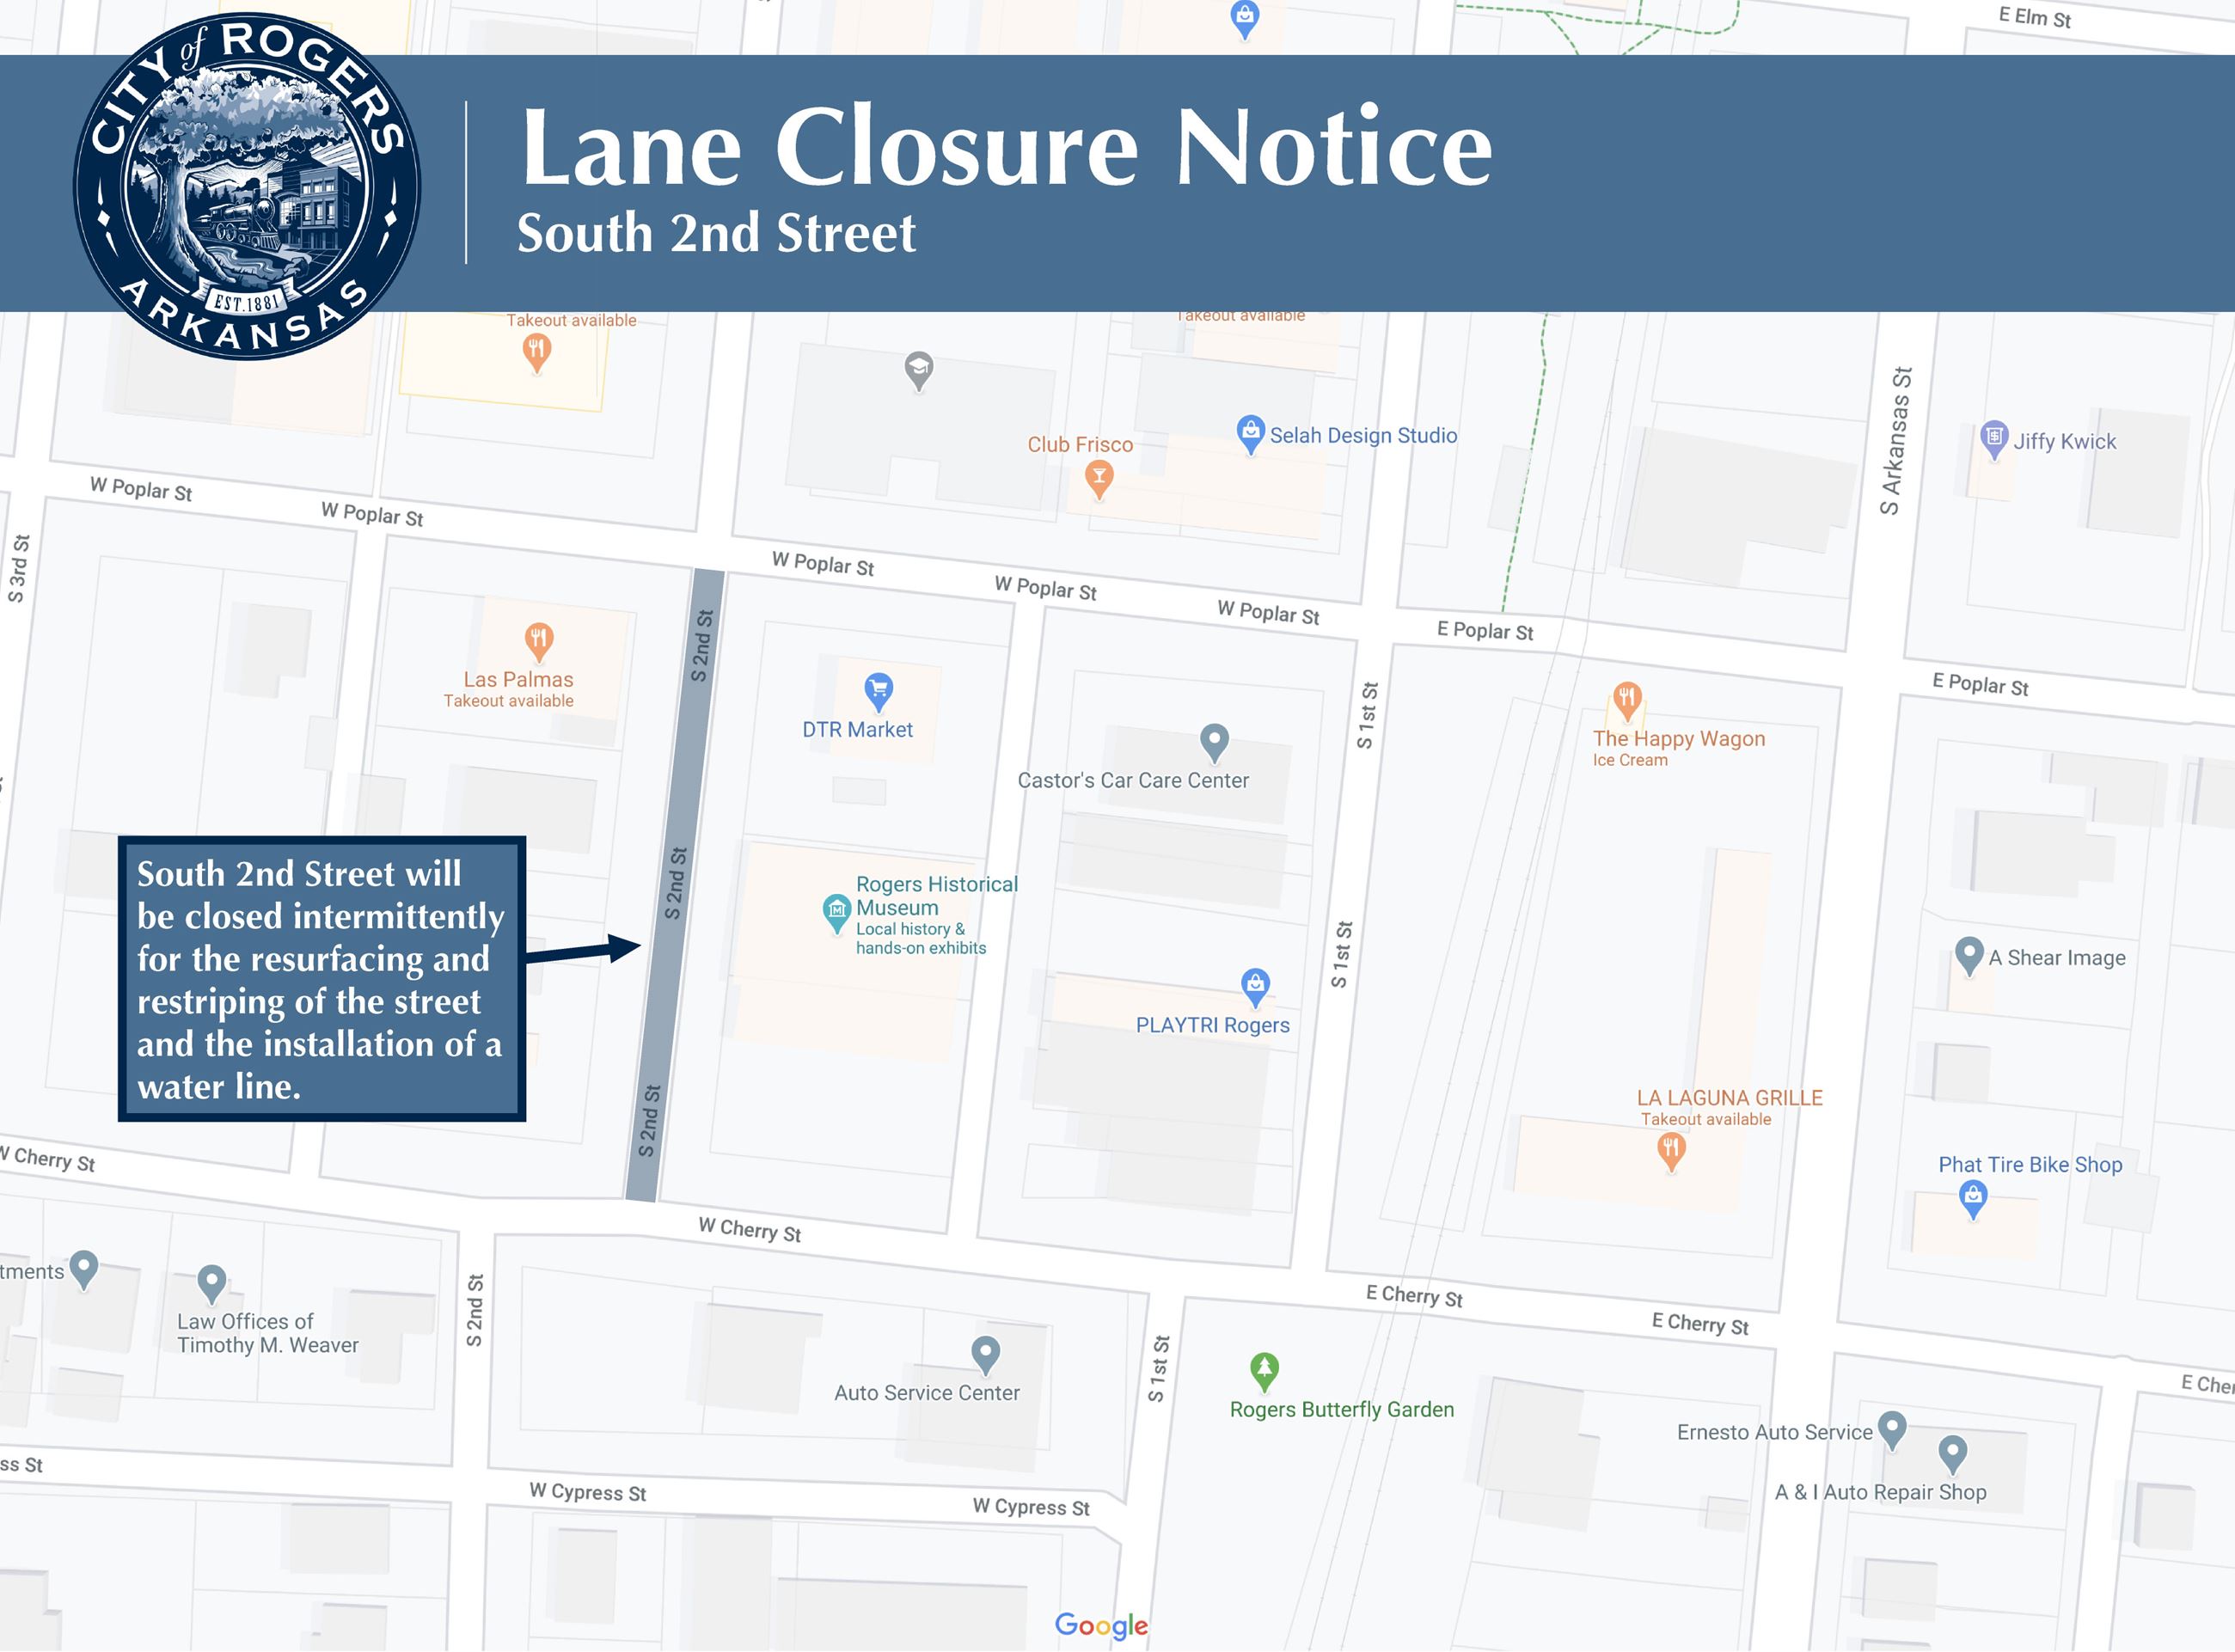 Map of South 2nd Street closure